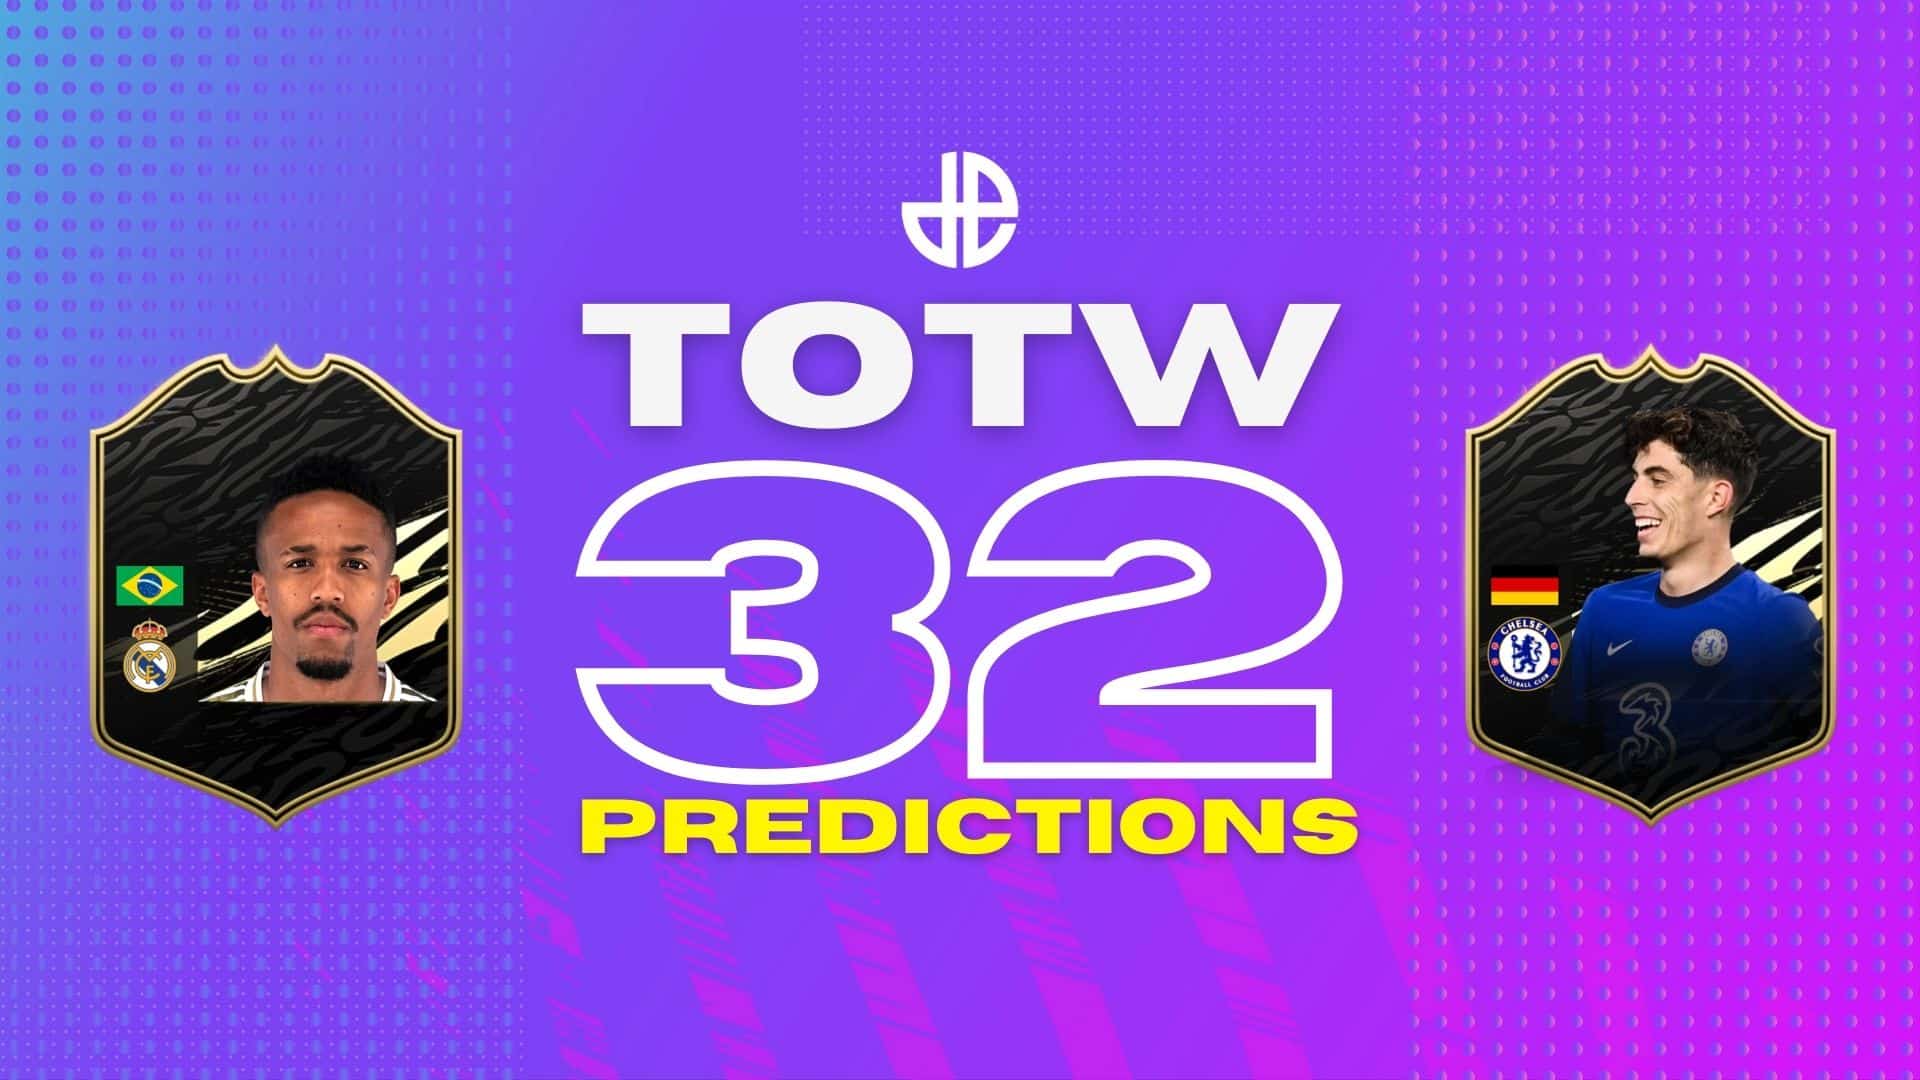 FIFA 21 TOTW 32 predictions with Eder and Havertz